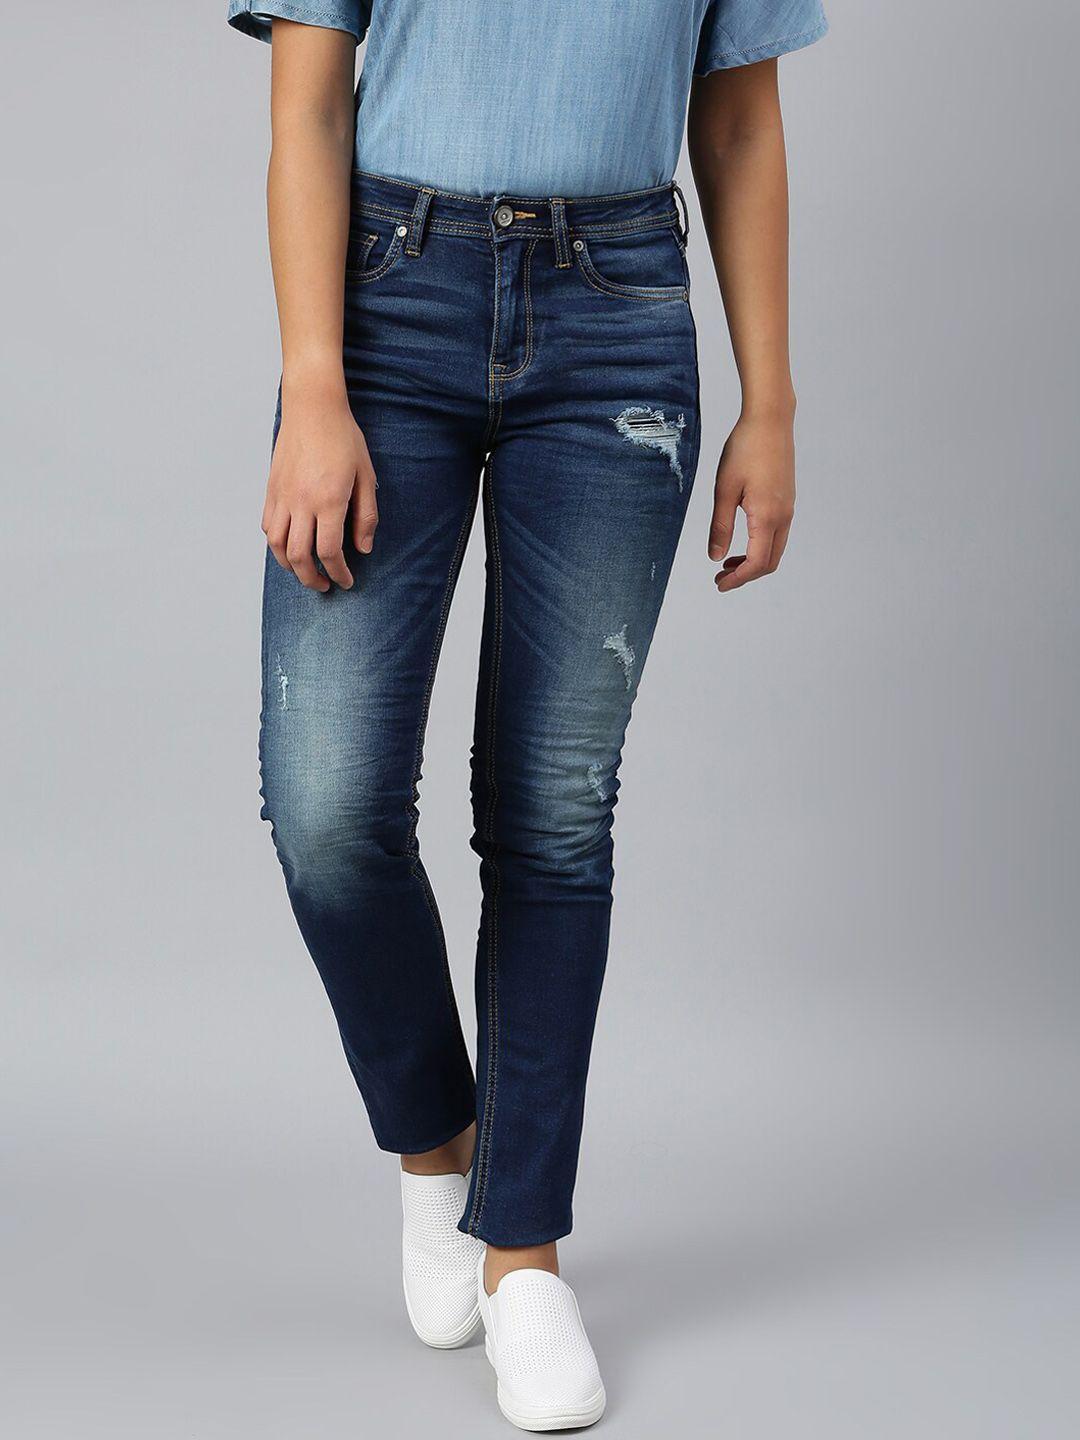 woodland-women-blue-mildly-distressed-light-fade-stretchable-jeans